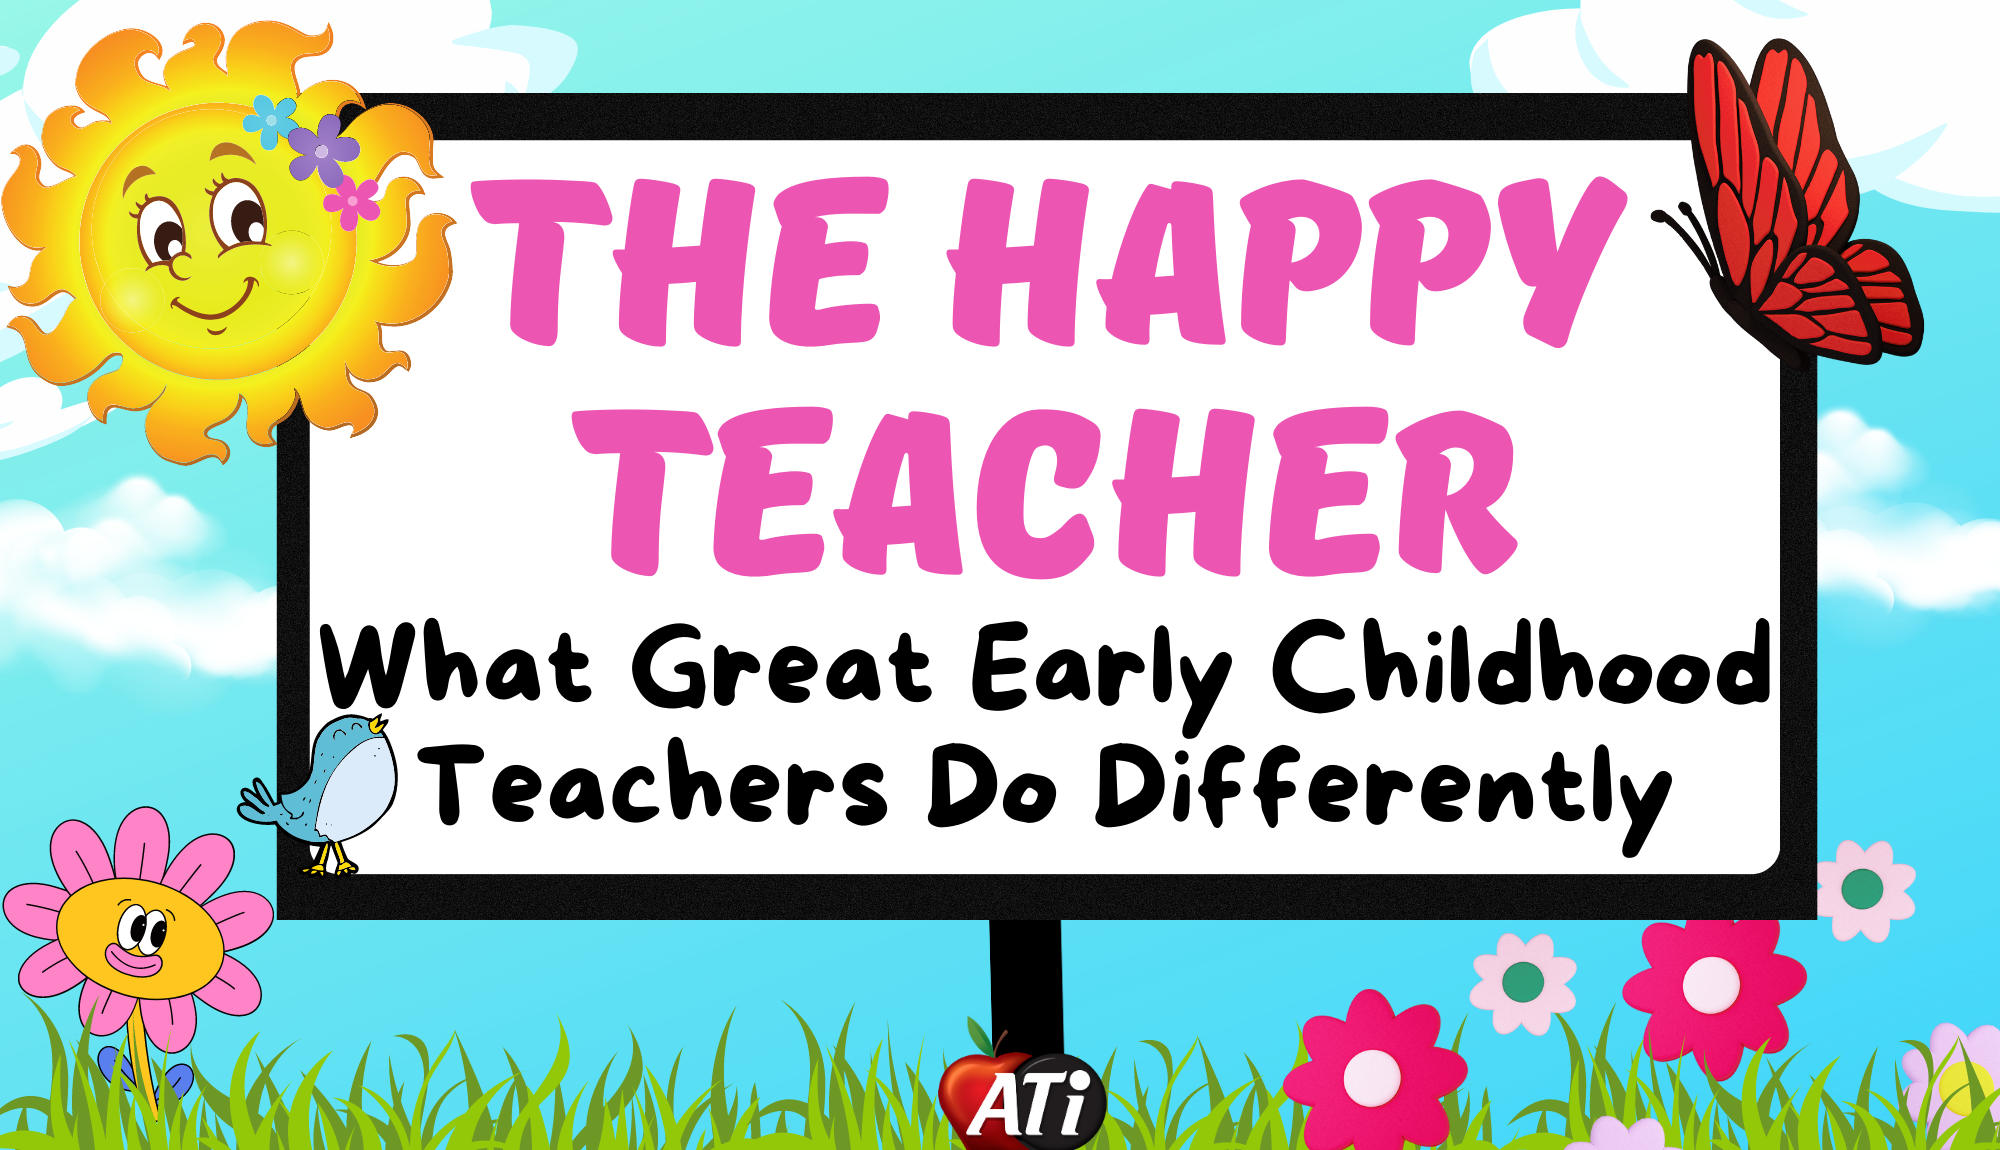 Image for The Happy Teacher - What Great Early Childhood Teachers Do Differently